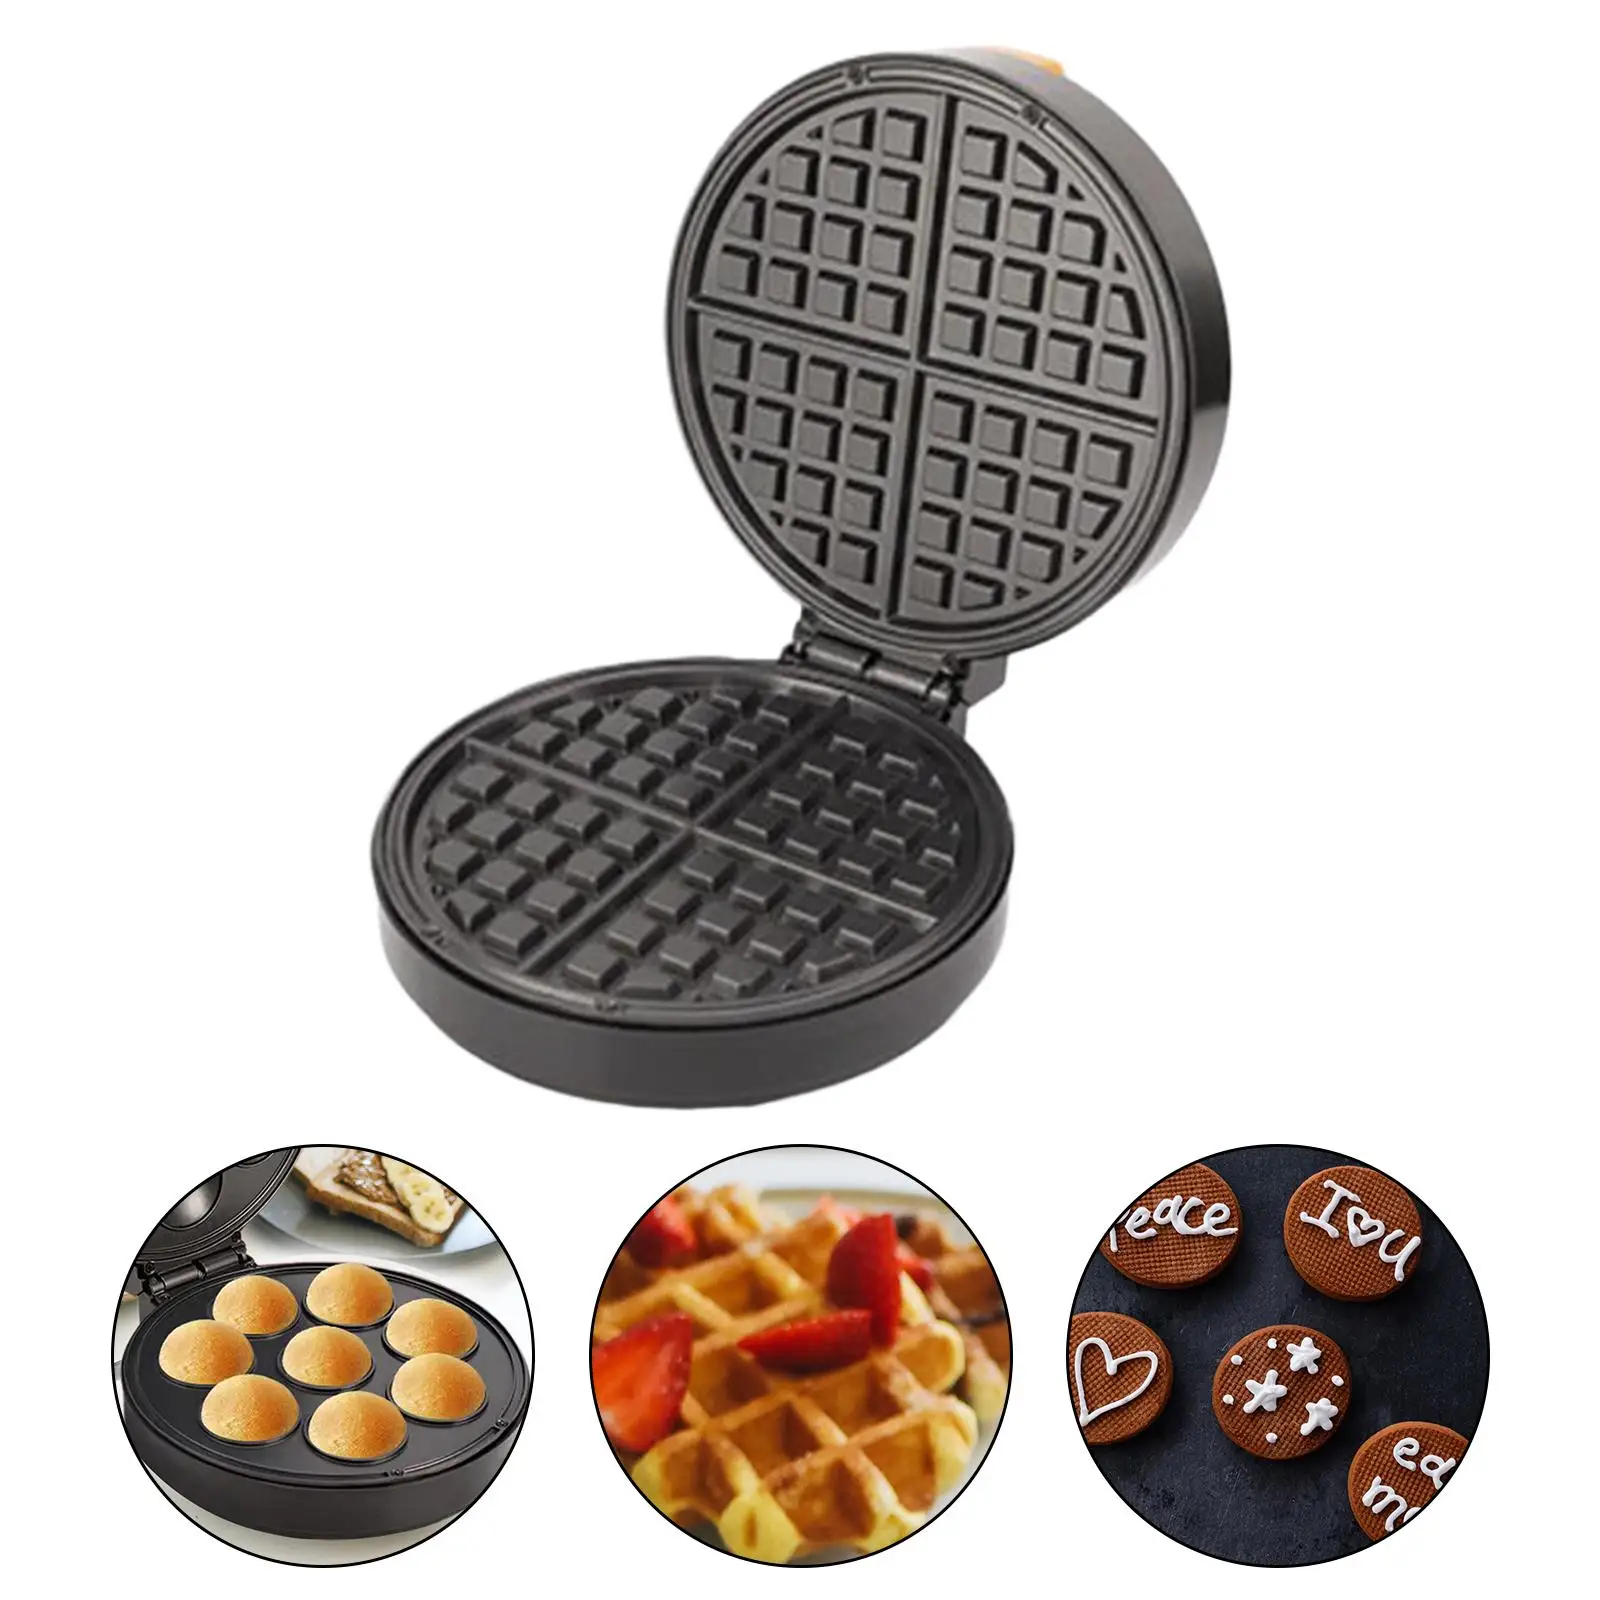 Cooking Plates Portable LED Display Multifunctional Household Waffle Furnace for Oatmeal